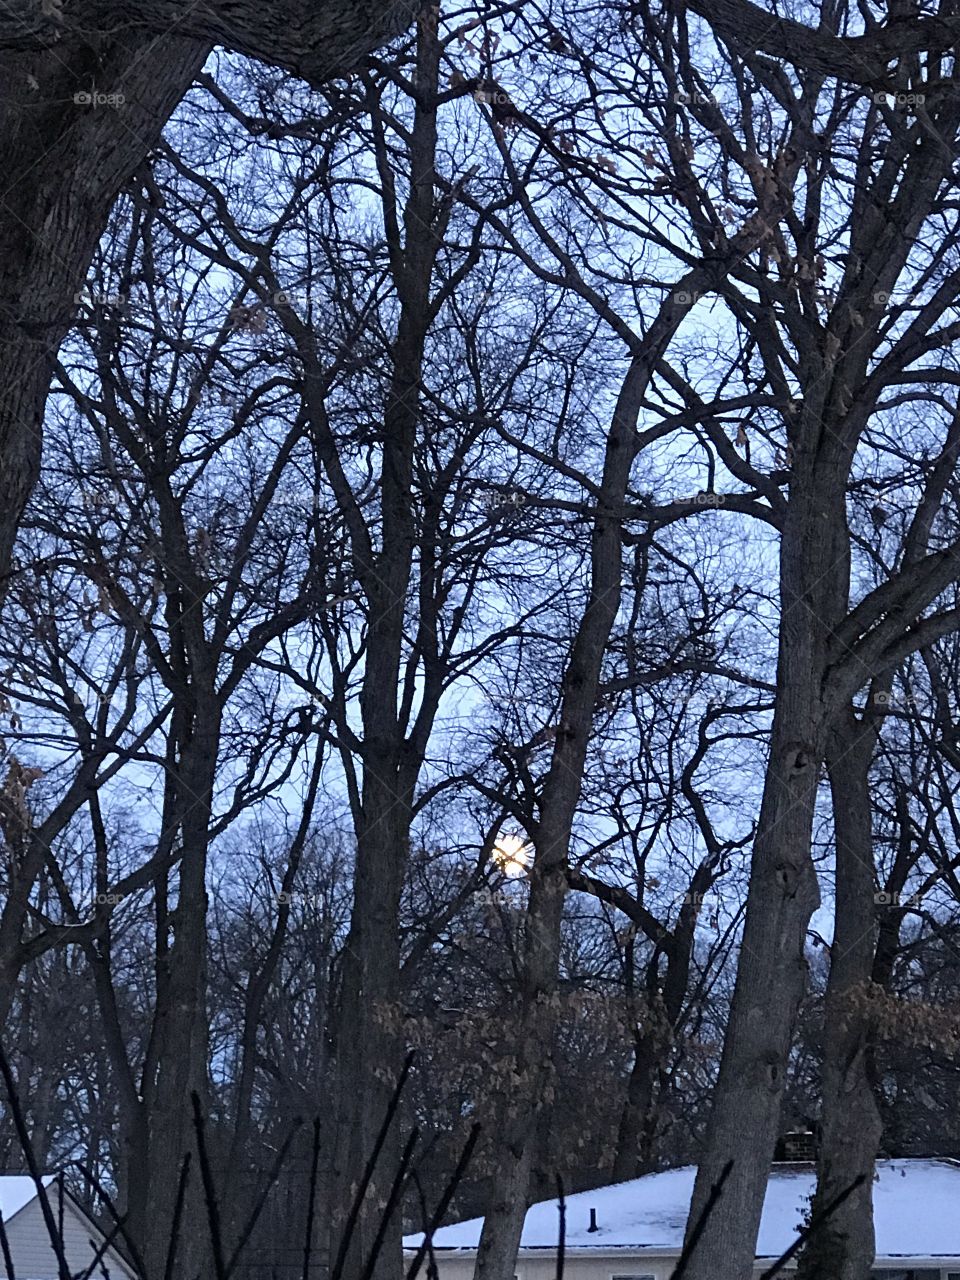 The moon peaking through the trees